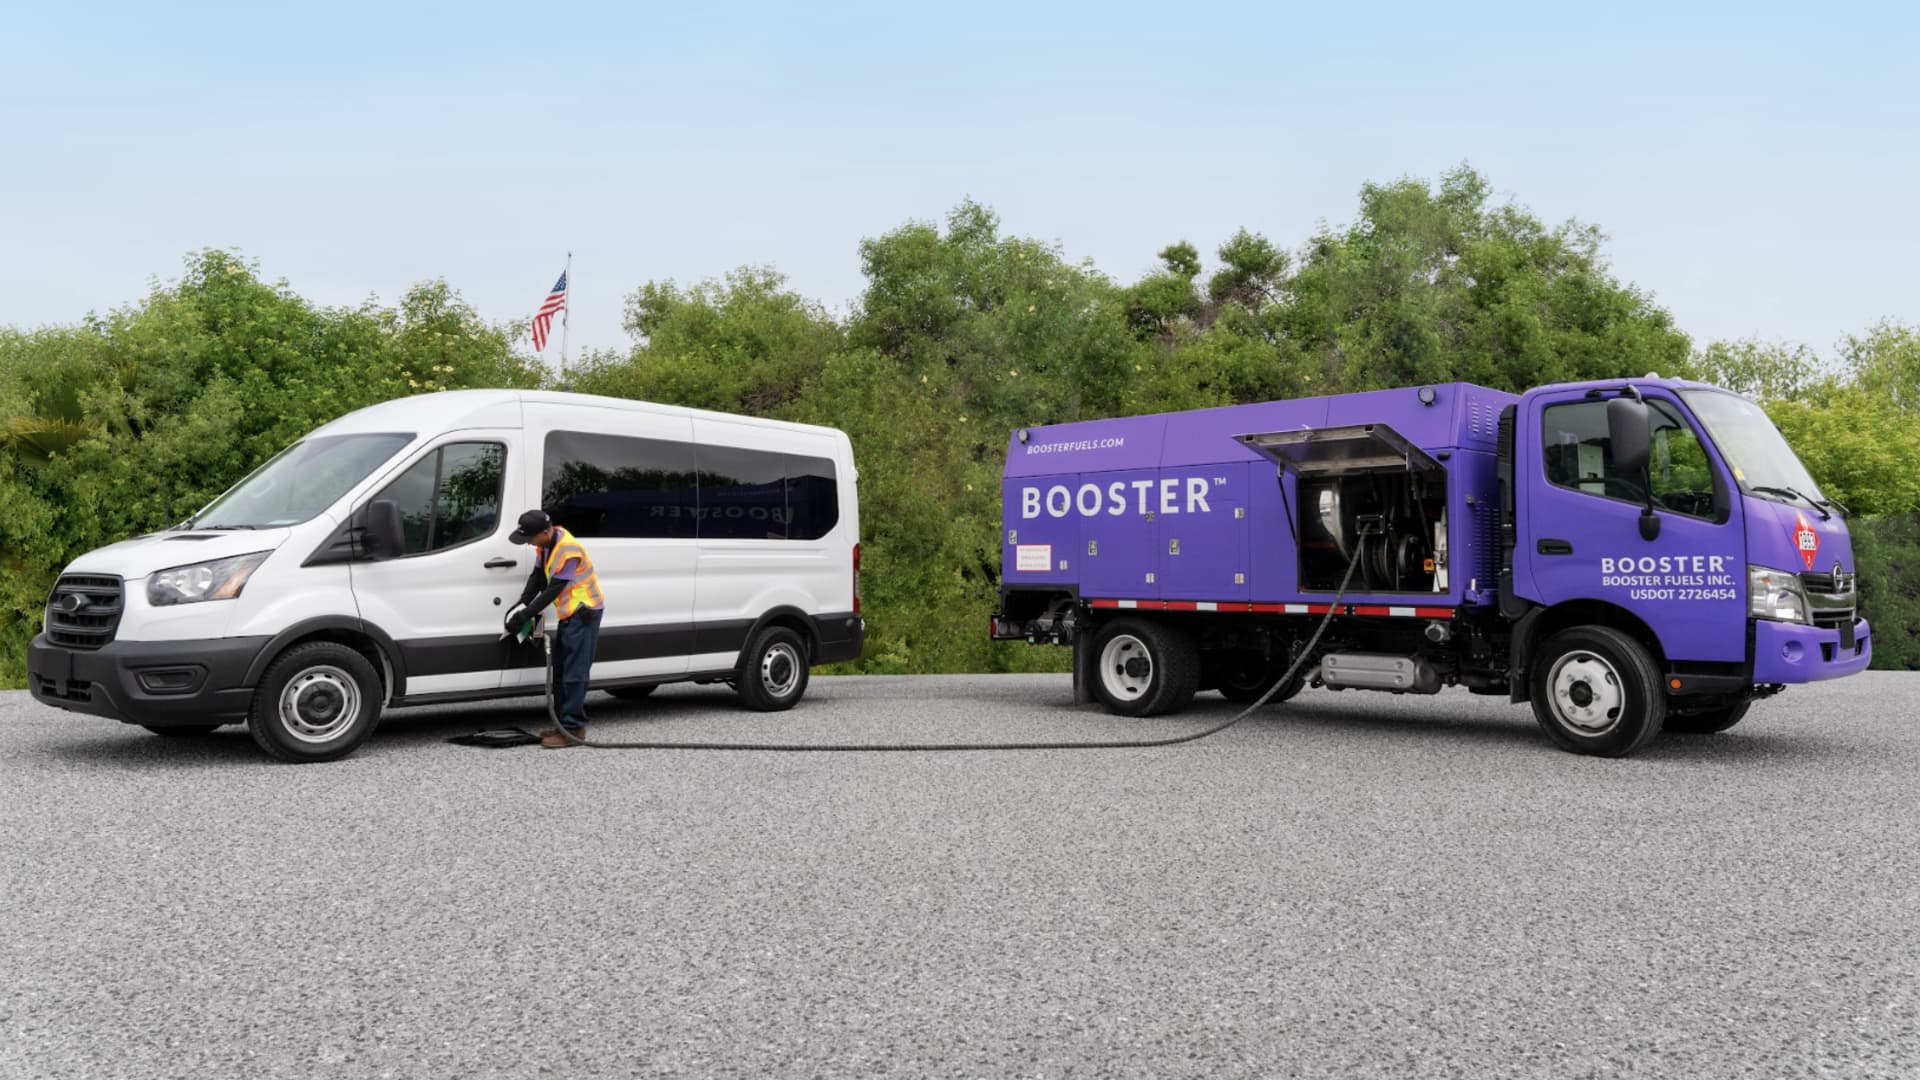 Booster making renewable fuels accessible in ways gas station cannot